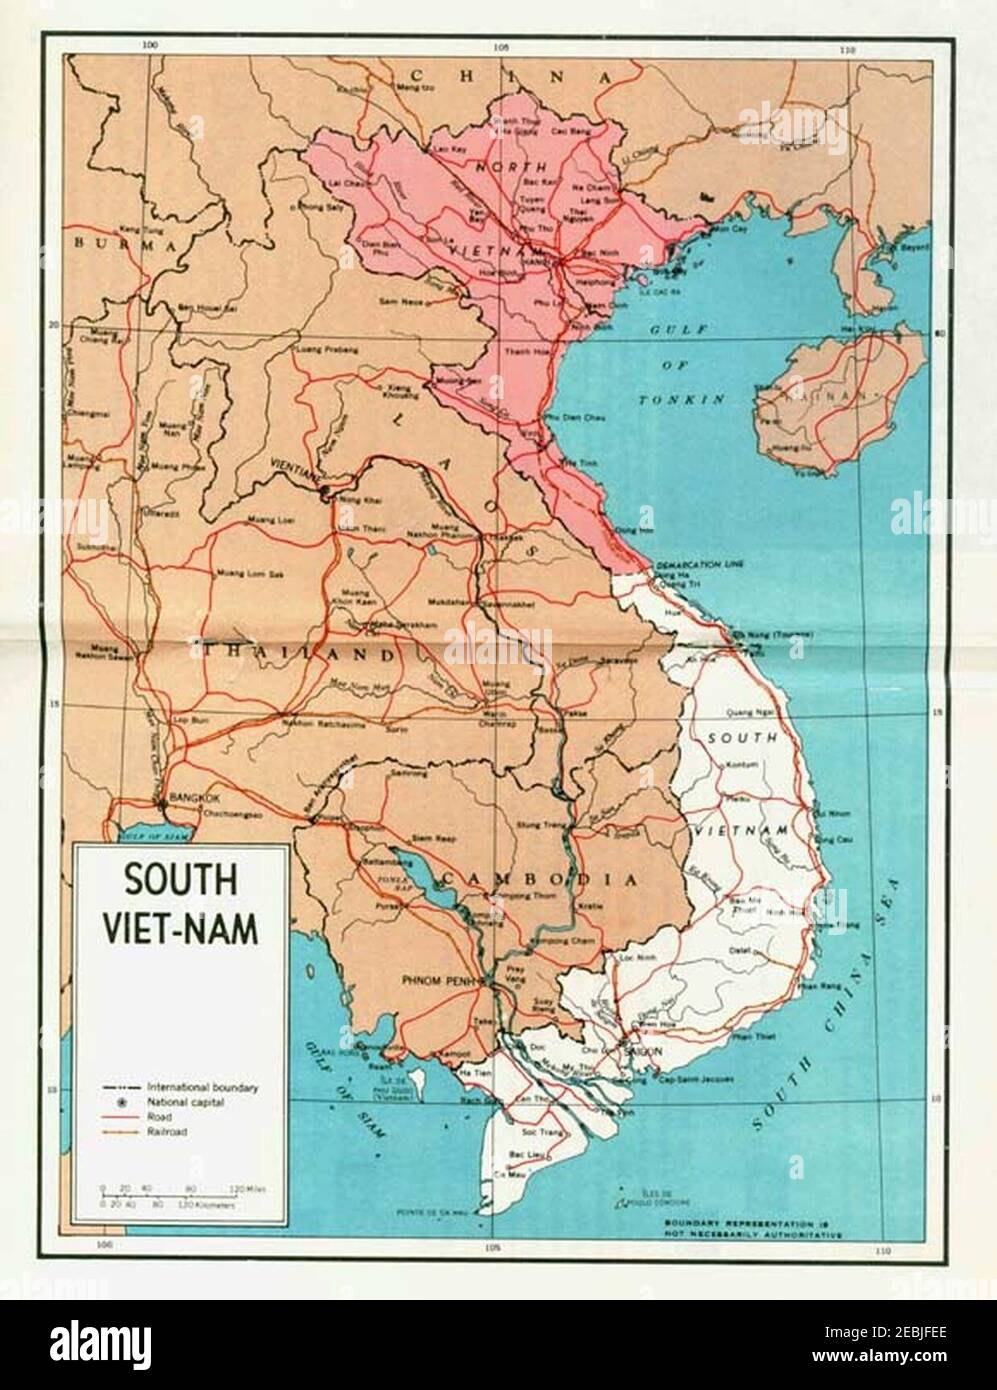 North and south vietnam map. Stock Photo